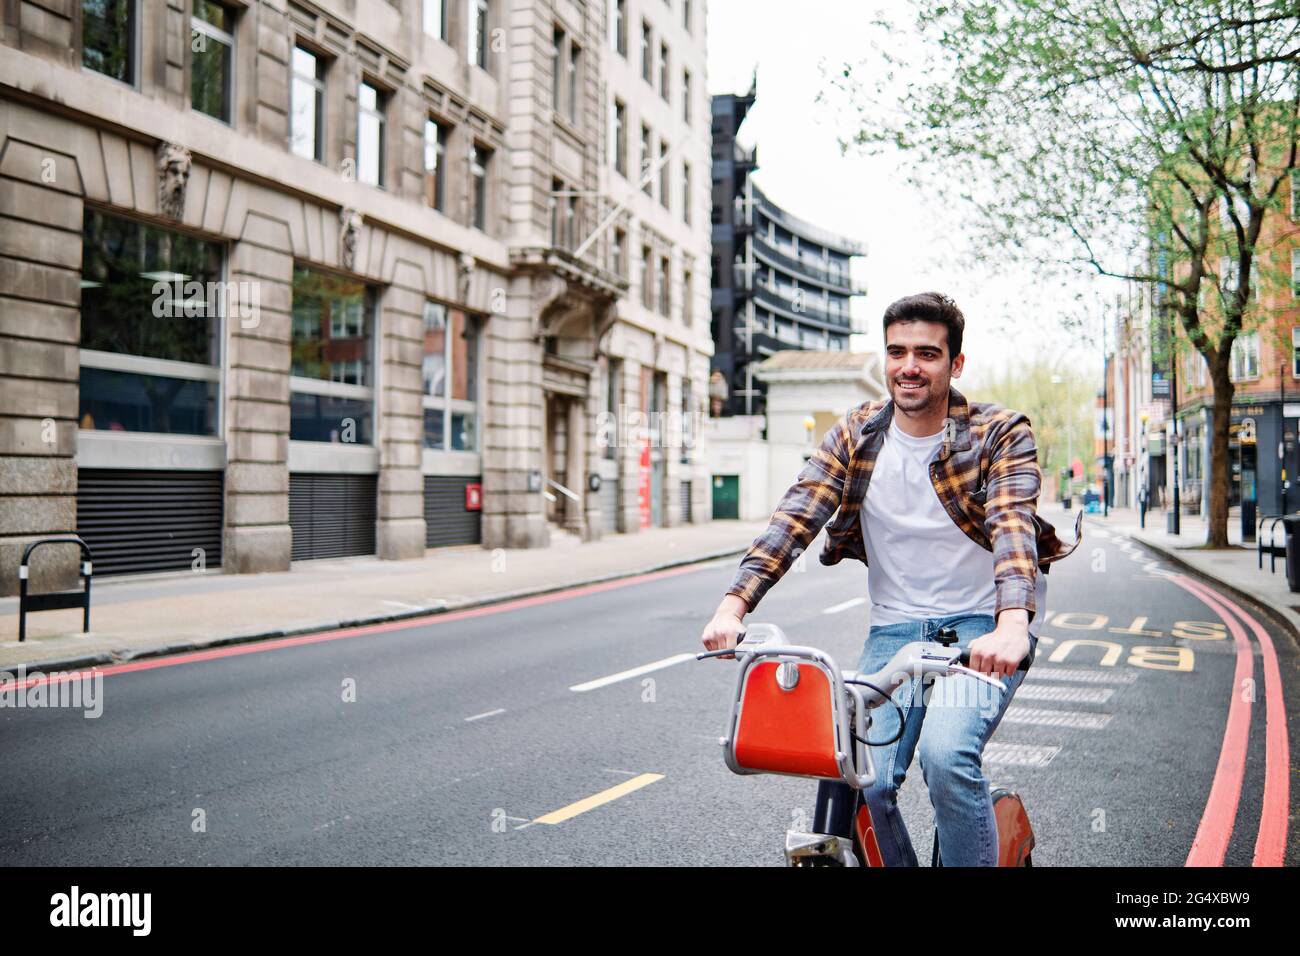 Smiling young man cycling on road in city Stock Photo